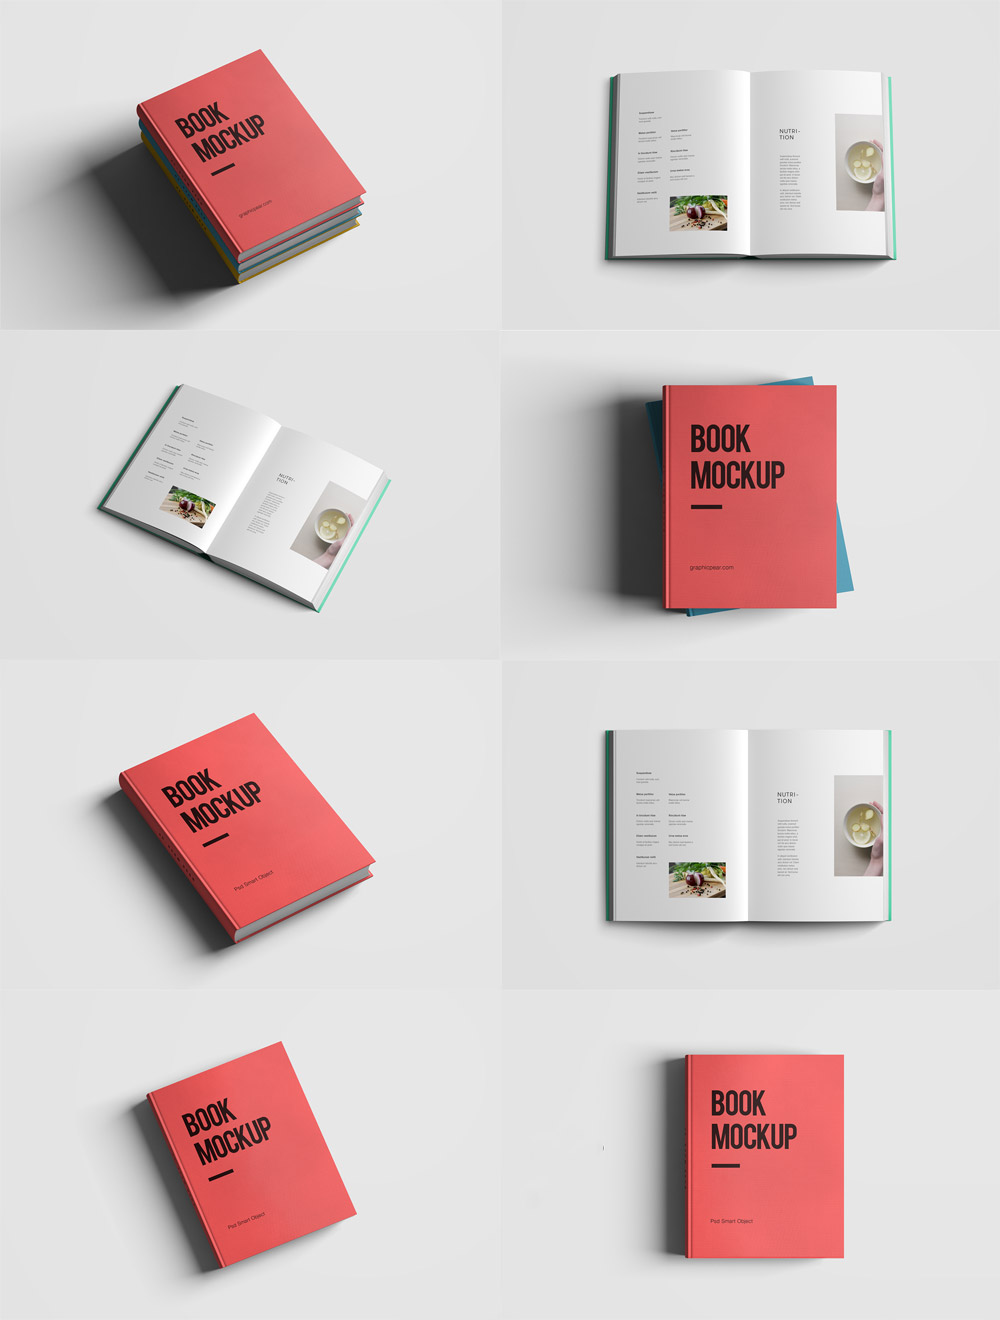 Realistic Book Mockup Template Pack Free PSD - Download PSD